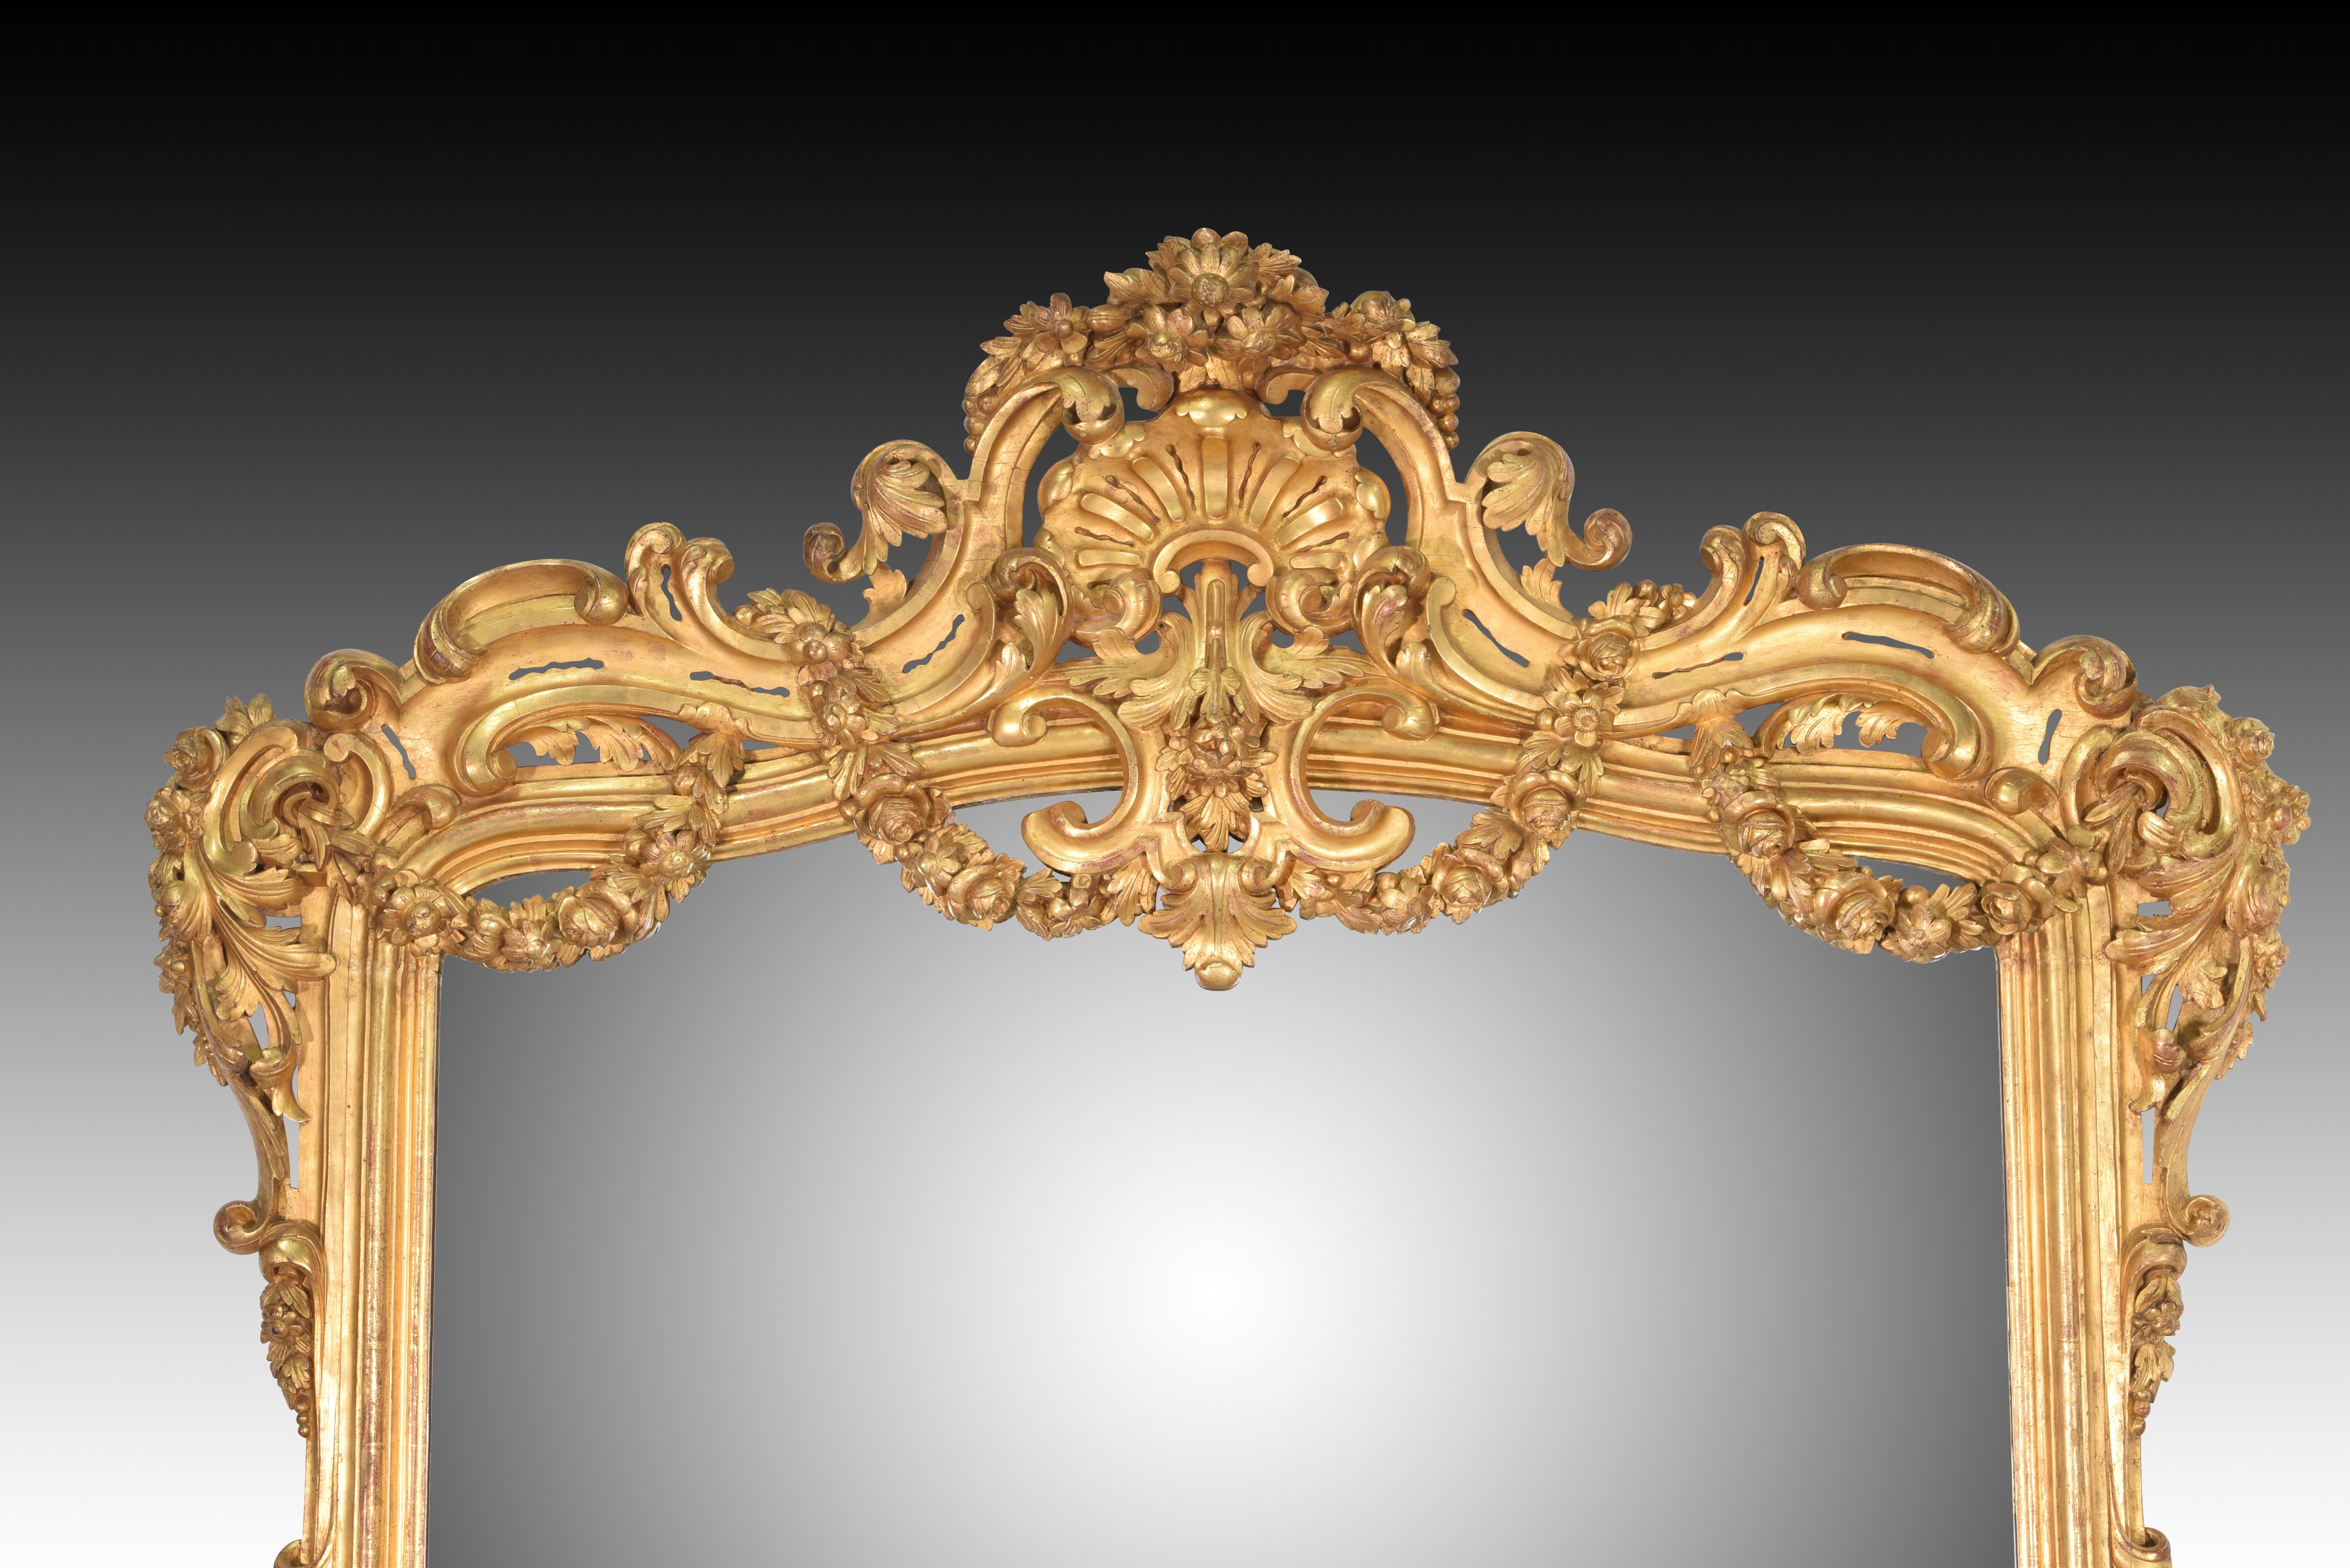 Mirror. Carved and gilded wood. Spain, 19th century.

 Rectangular wall mirror with a frame made of carved and gilded wood, with some openwork areas. It has a crest at the top, with architectural and vegetal decoration (garlands of flowers,